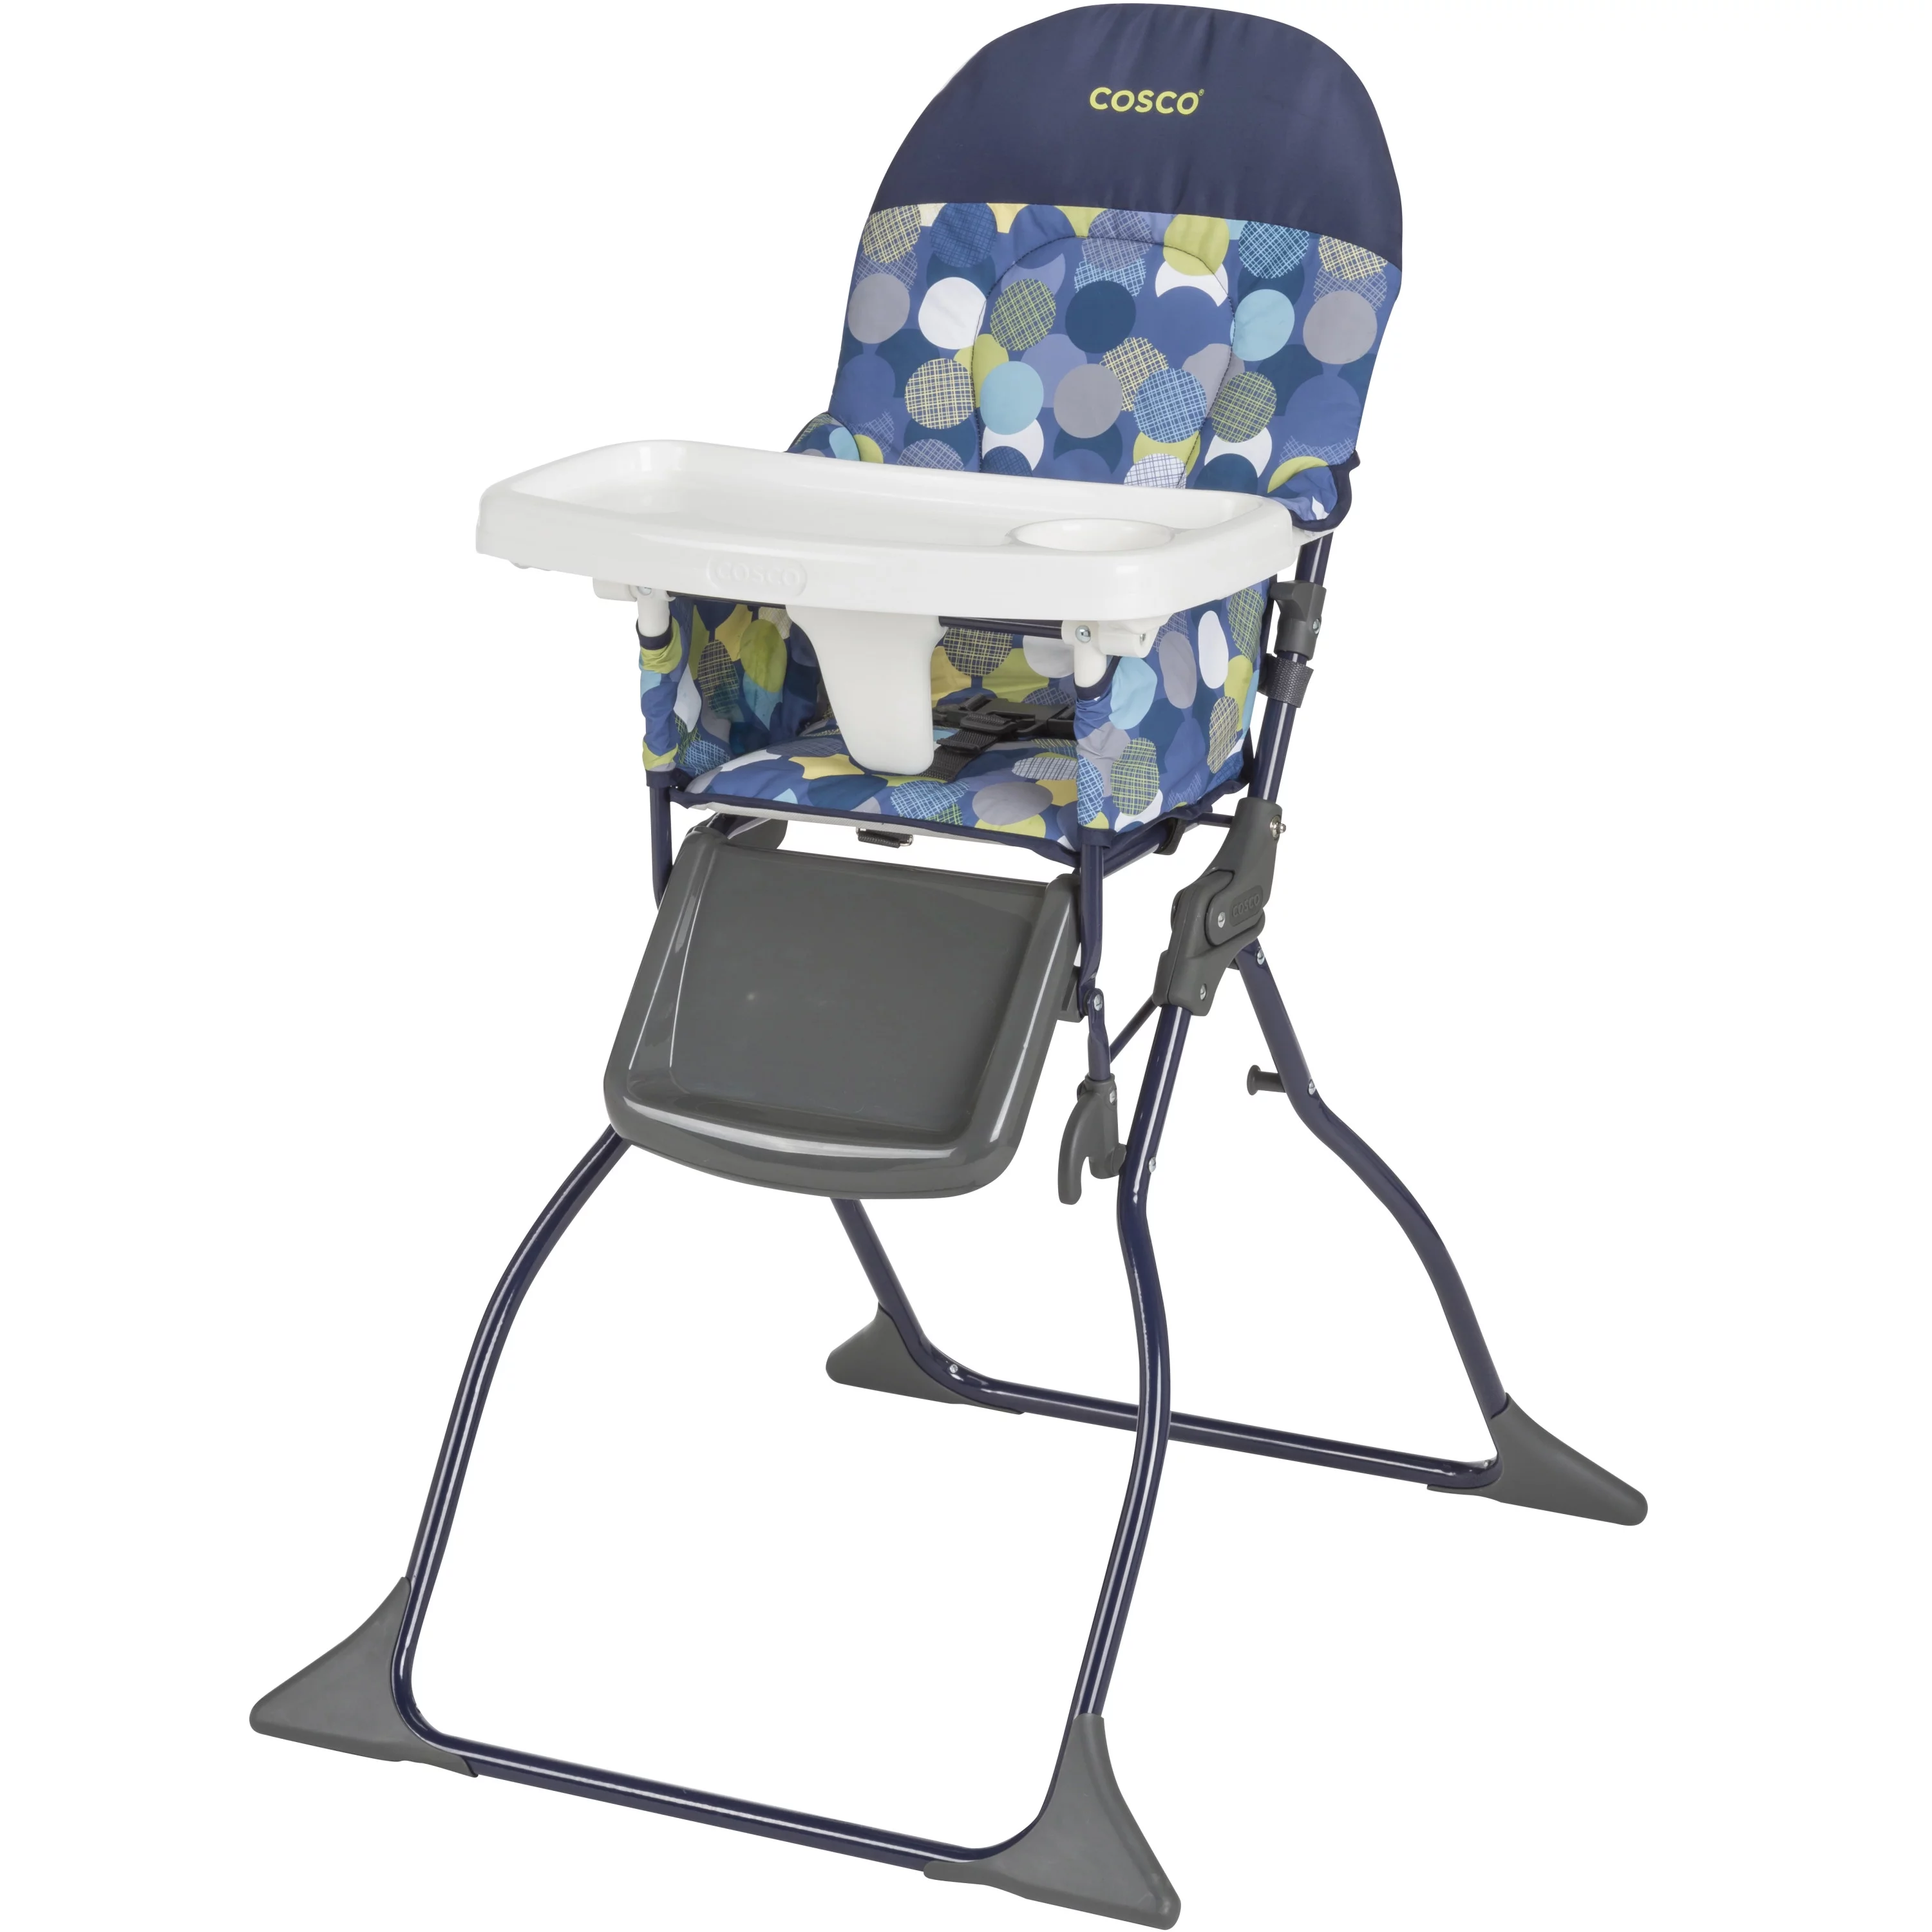 Cosco Simple Fold Full Size High Chair with Adjustable Tray, Comet, Toddler